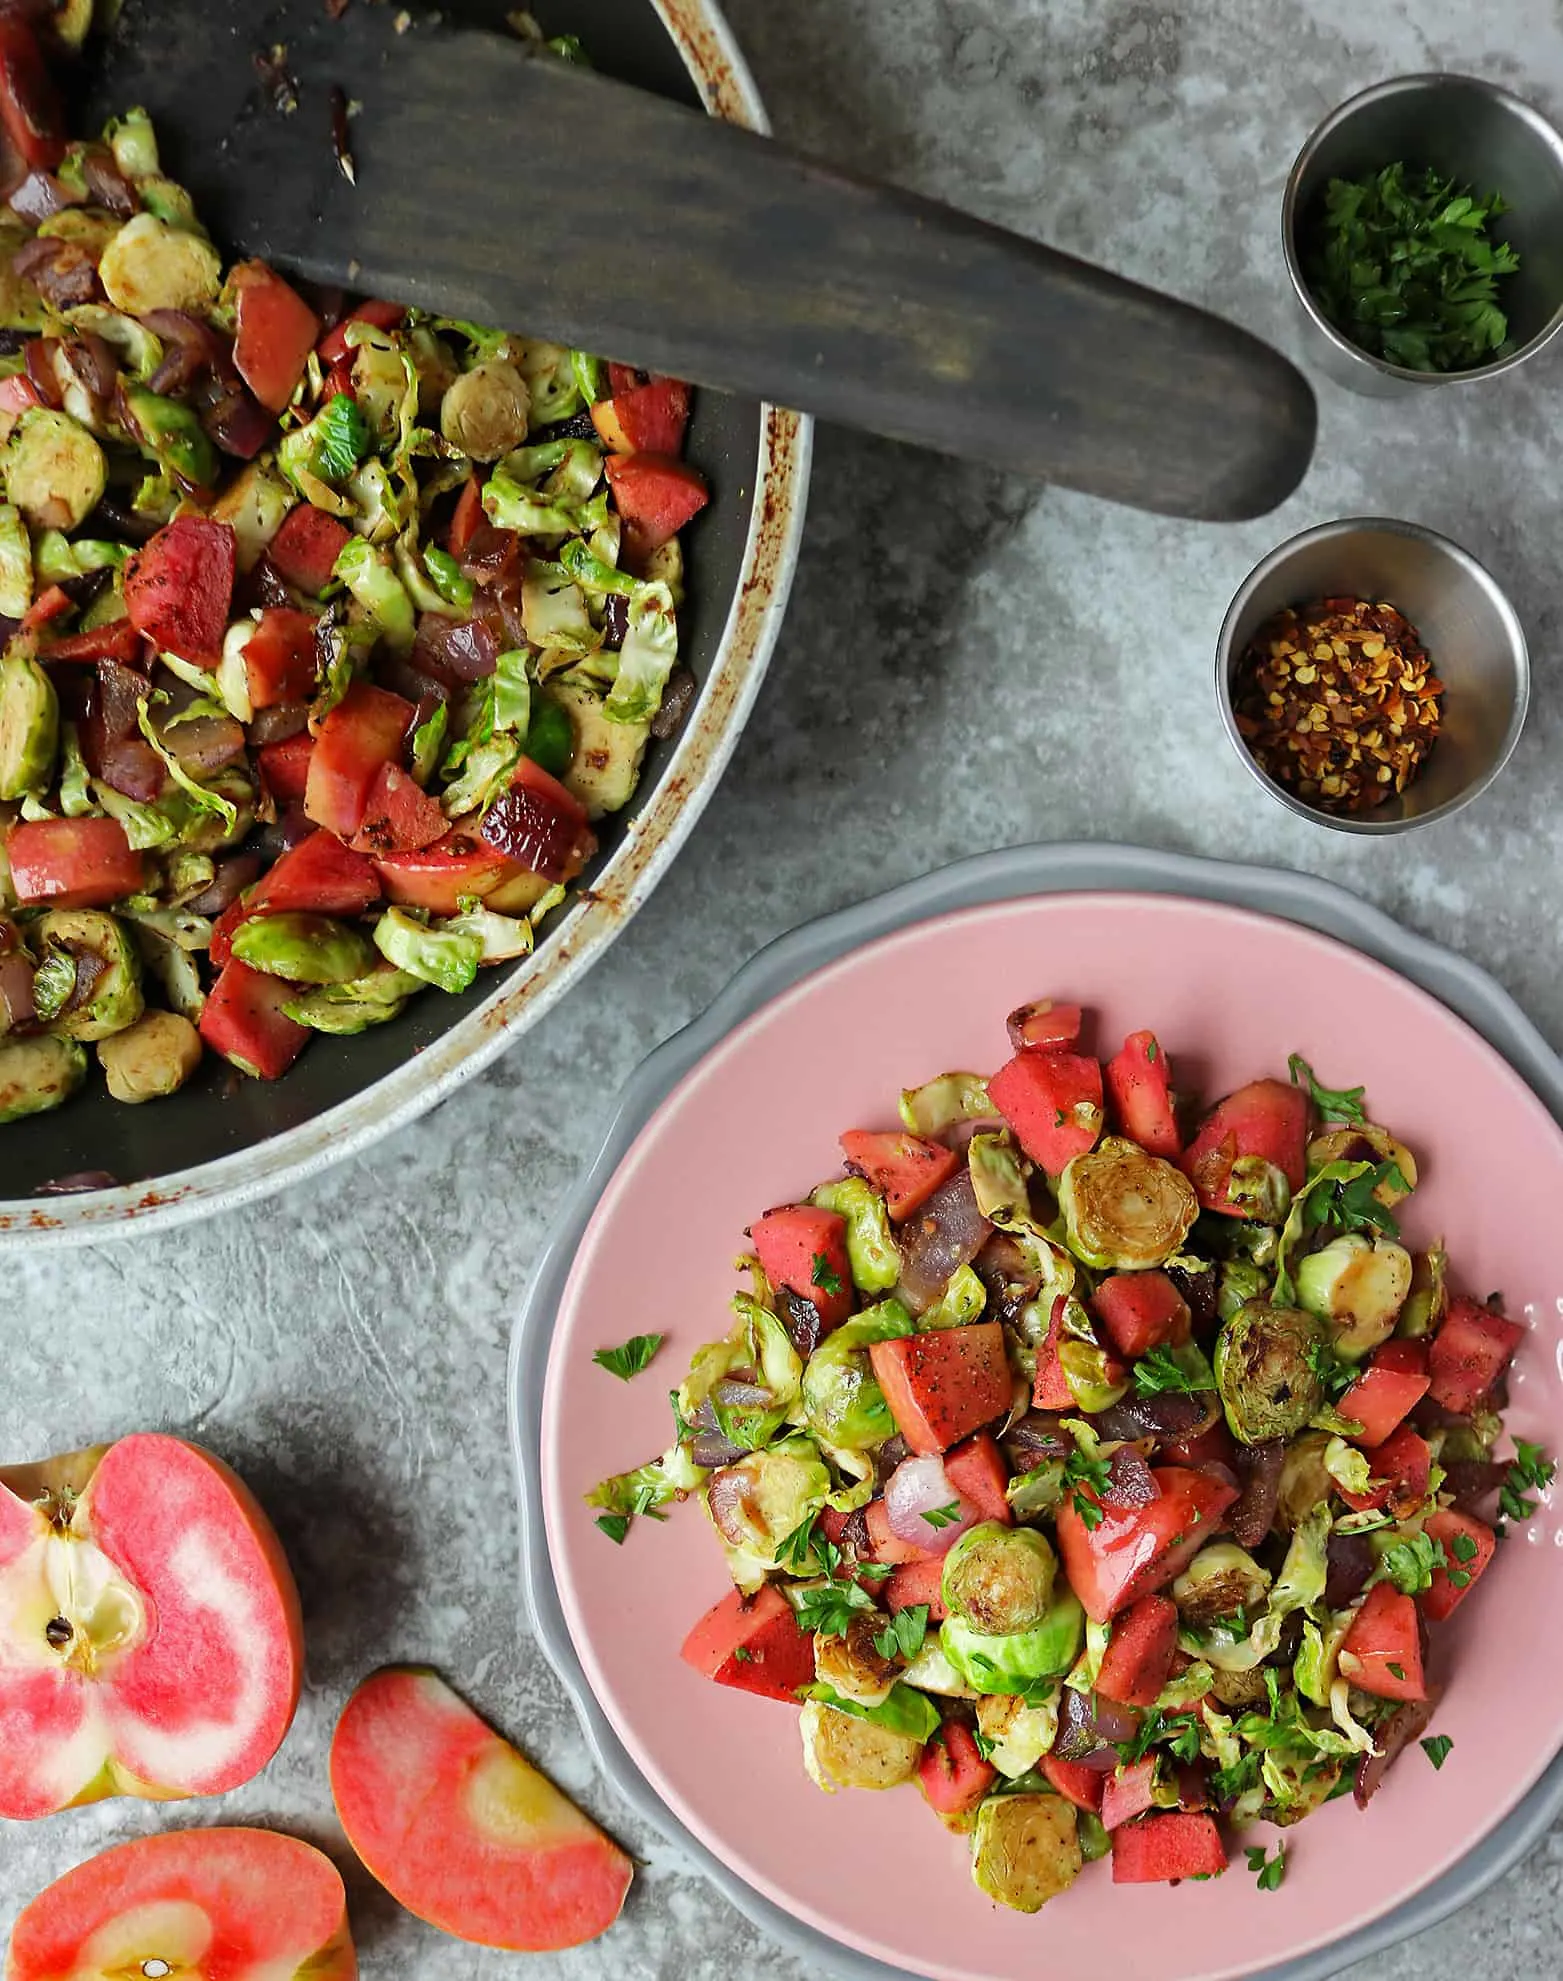 Warm Sautéed Brussels Sprouts And Apple Salad